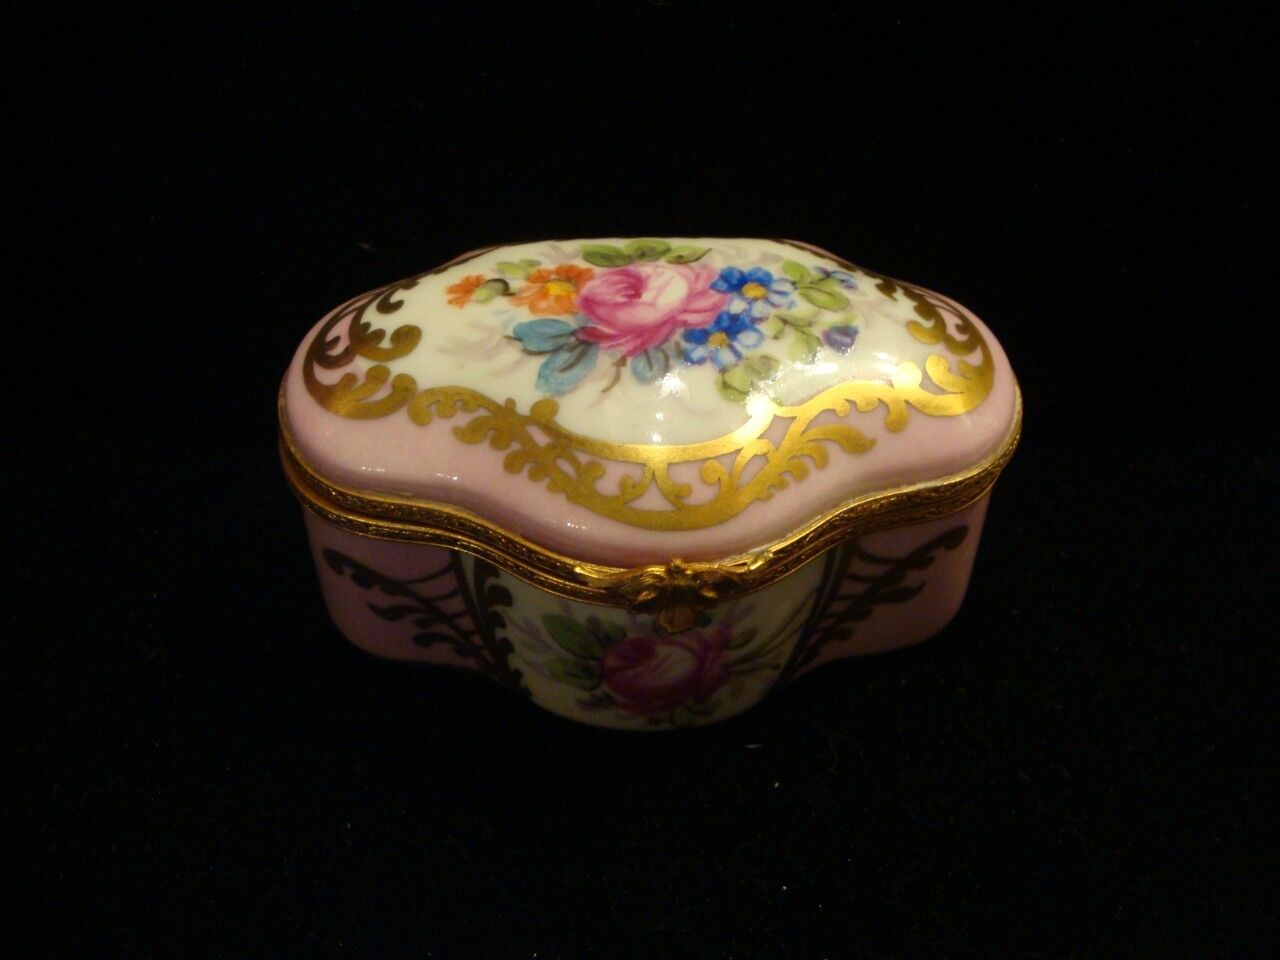 CLEARANCE $995 LOVELY RARE FRENCH SEVRES PINK PORCELAIN JEWELRY BOX